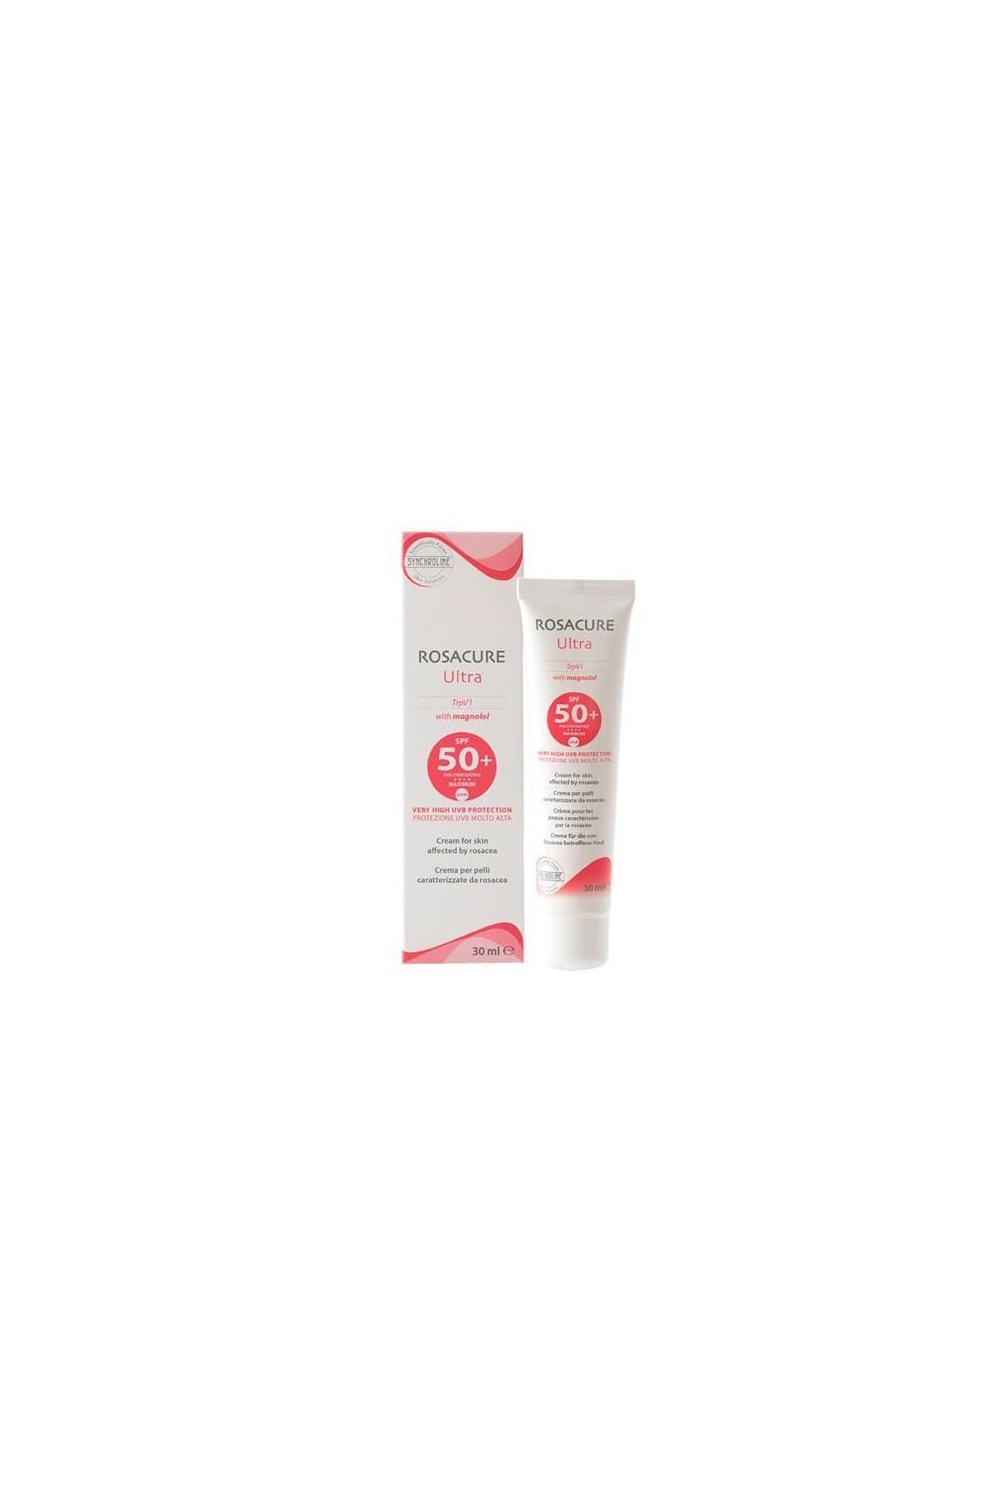 CANTABRIA LABS - Rosacure Ultra SPF 50+  30ml